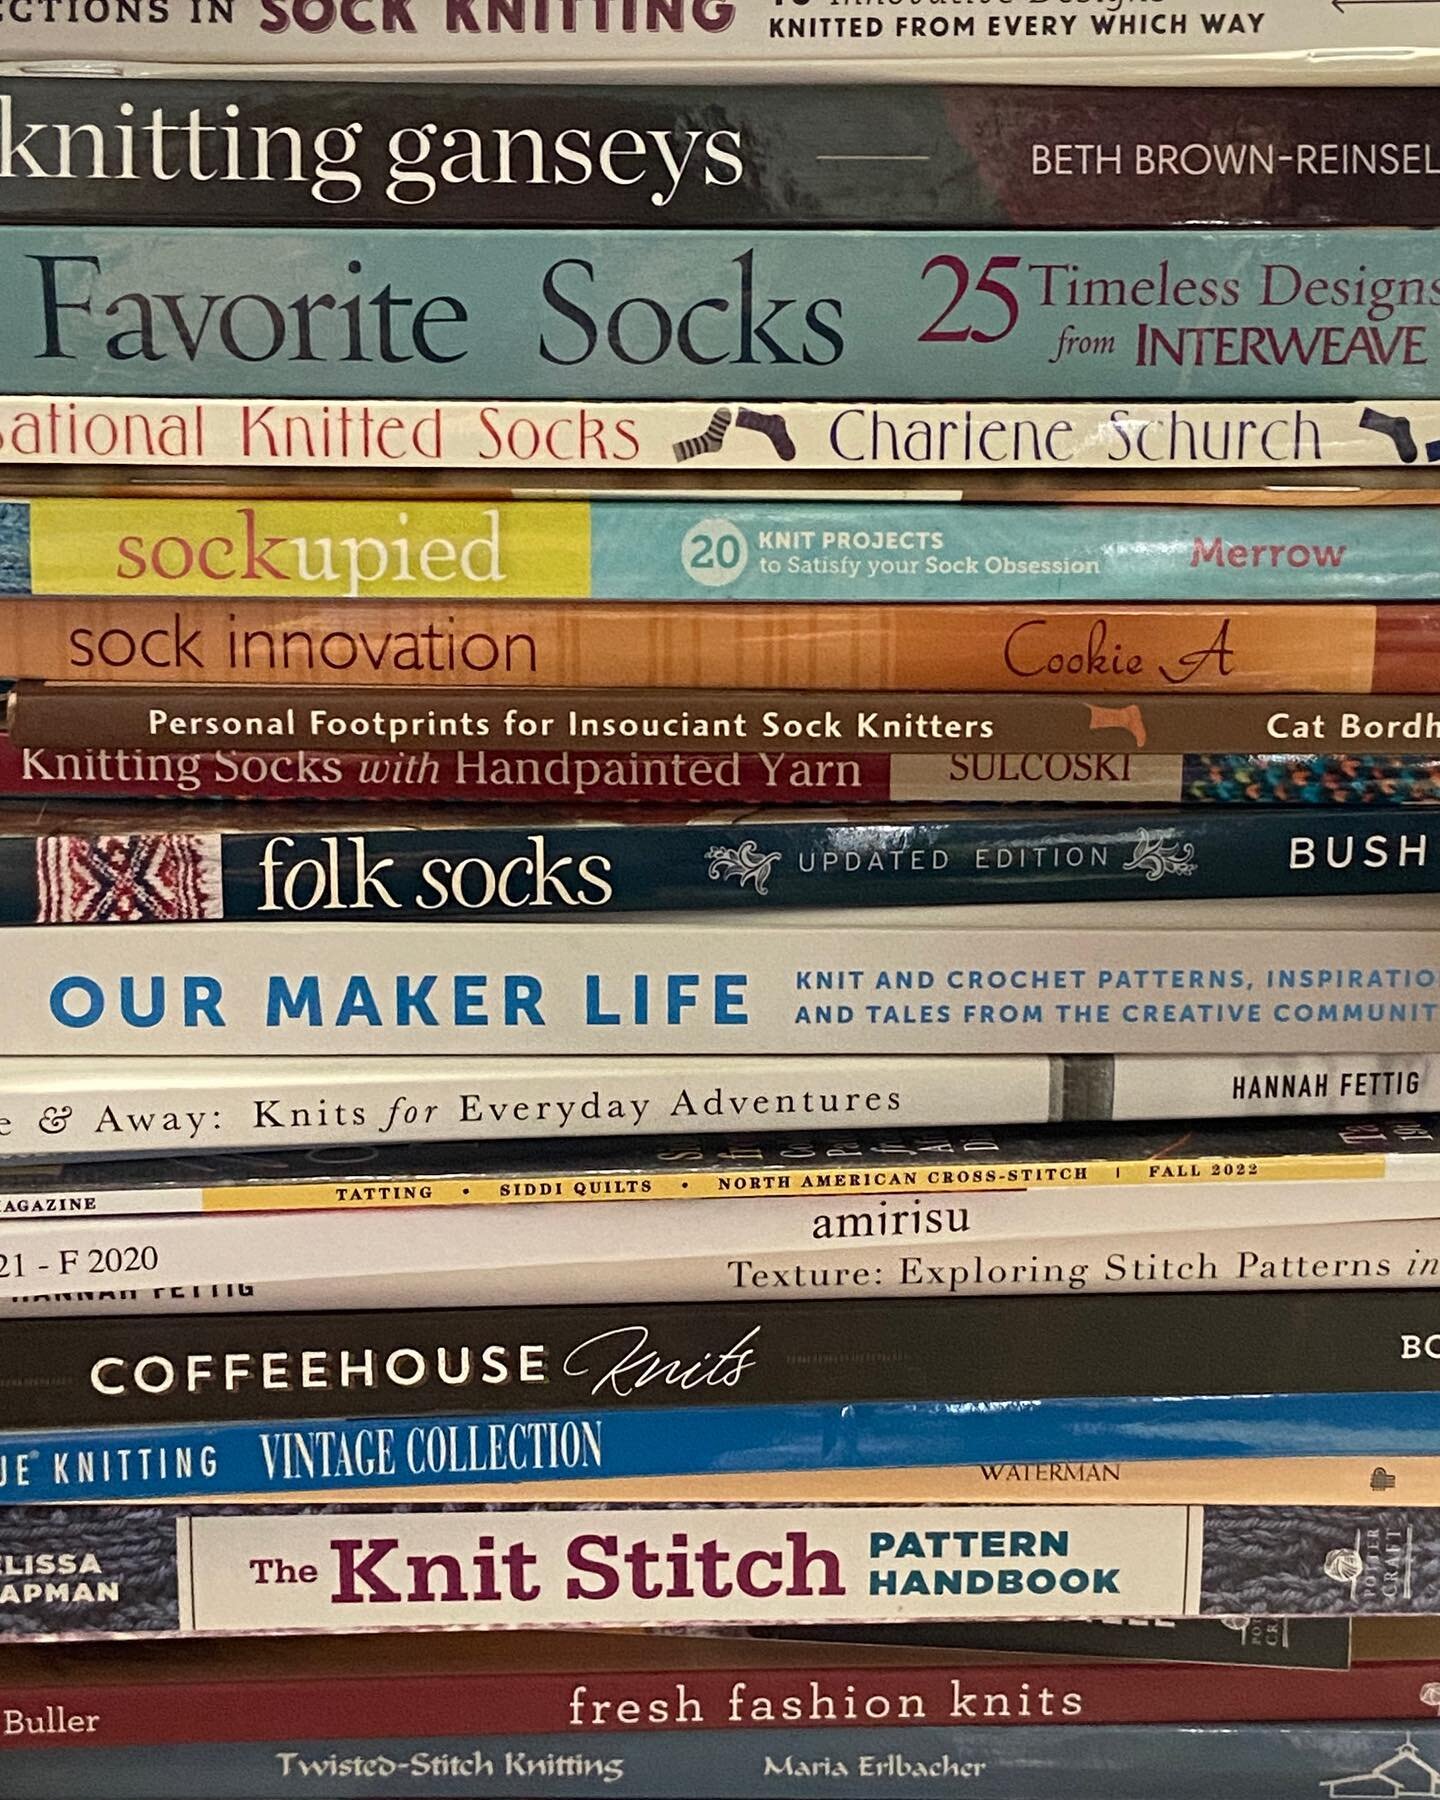 Popup Sale! We&rsquo;ve just received a large donation of high-end knitting books, yarns, and project bags (including many absolutely gorgeous suede and leather ones from Joji &amp; Co!). Everything will be on sale Wednesday (5/17) through Saturday (